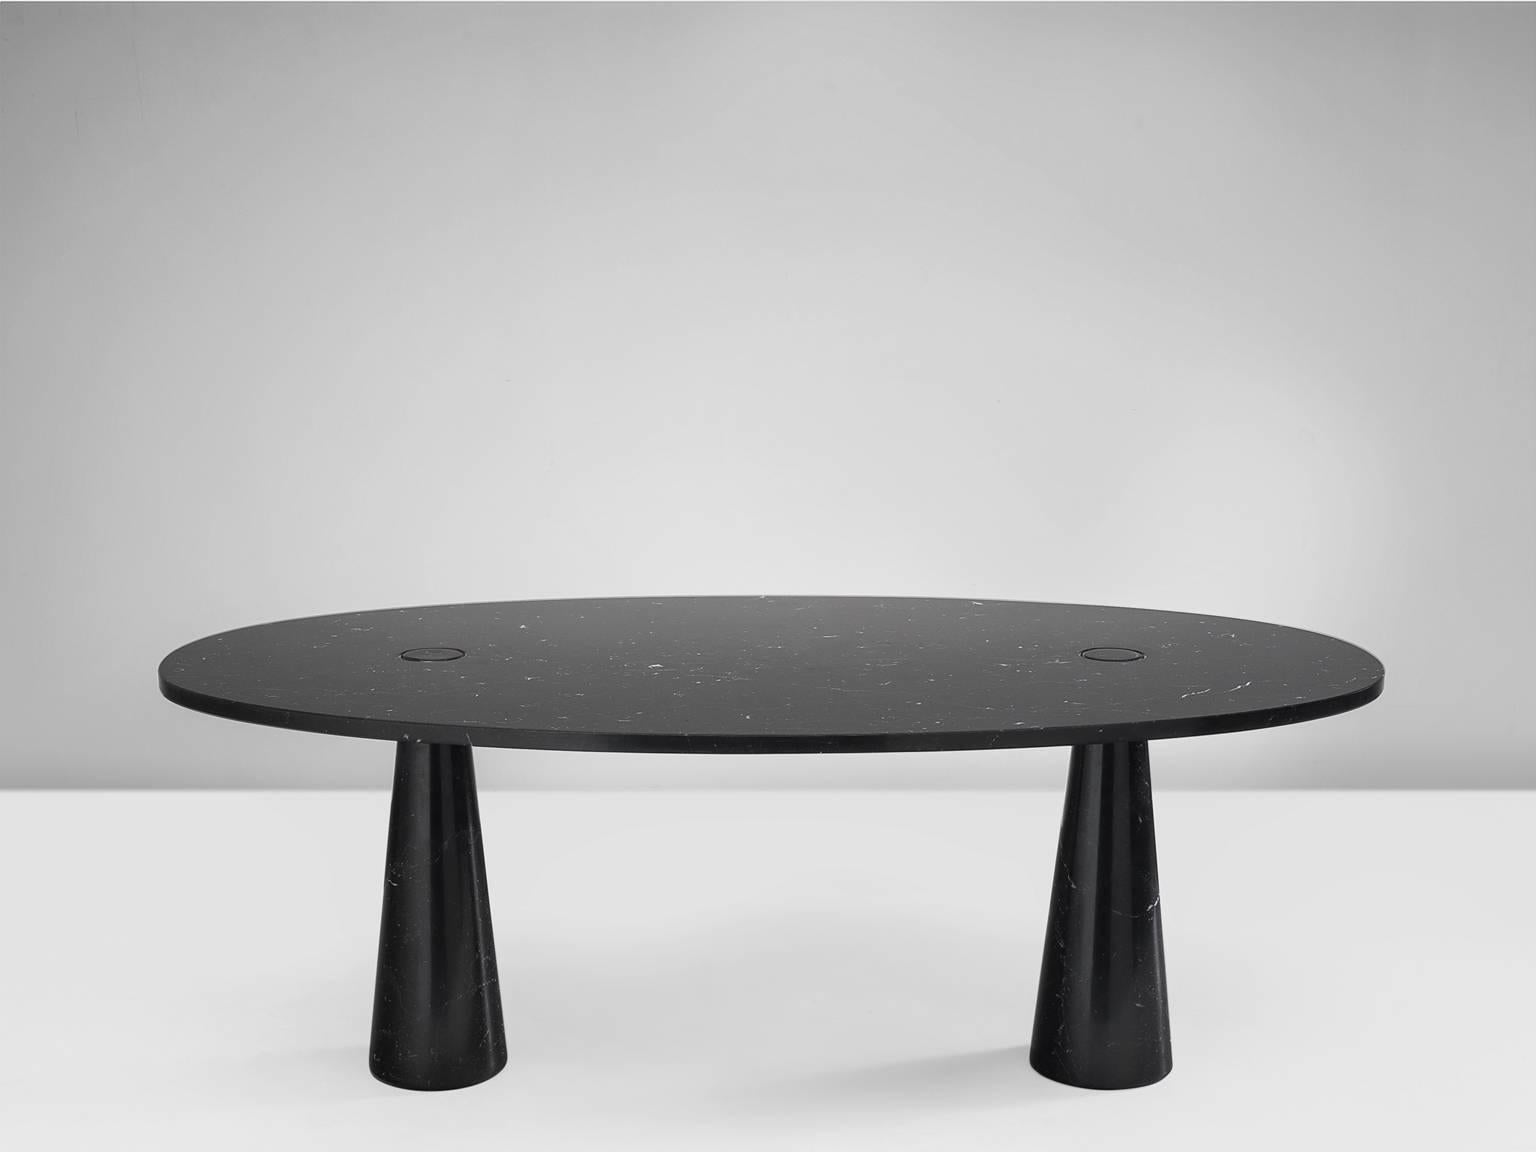 Dining table by Angelo Mangiarotti, marble, 1970s. 

This sculptural table by Angelo Mangiarotti is a skillful example of postmodern design. The table is executed in nero marquina marble. The oval table features no joints or clamps and is